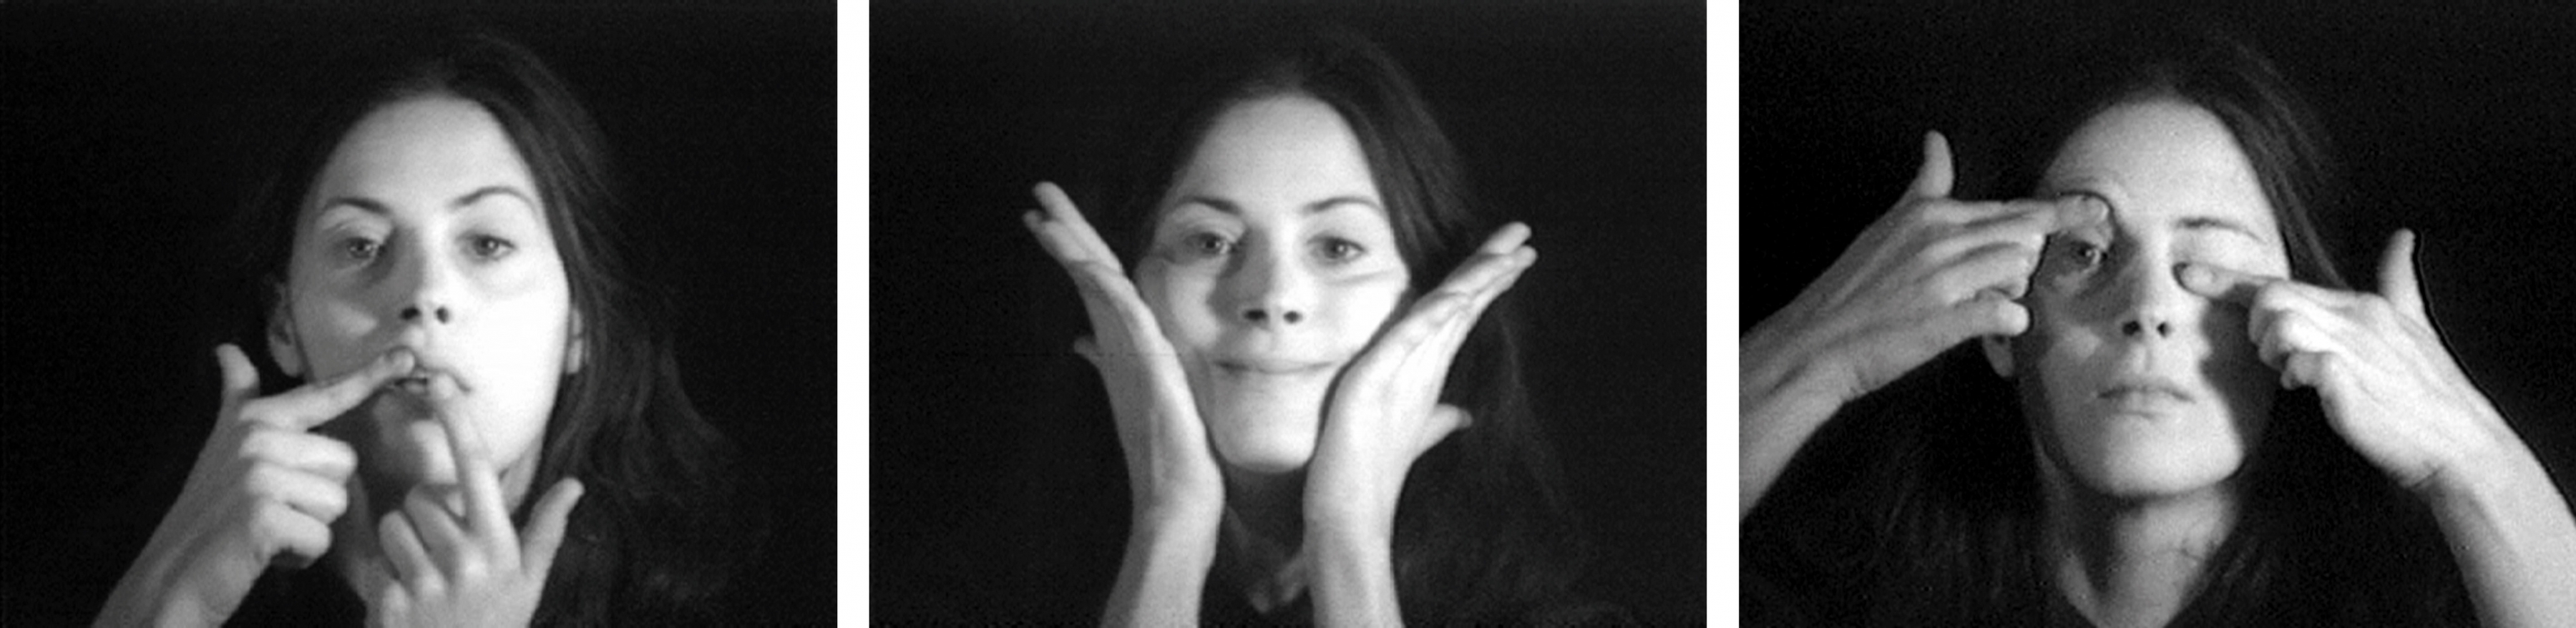 Hannah Wilke
Gestures, 1974
Stills from videotaped performance
Black and white, sound, 35:30 min.
Hannah Wilke Collection &amp;amp; Archive, Los Angeles.
Courtesy Electronic Arts Intermix, New York.